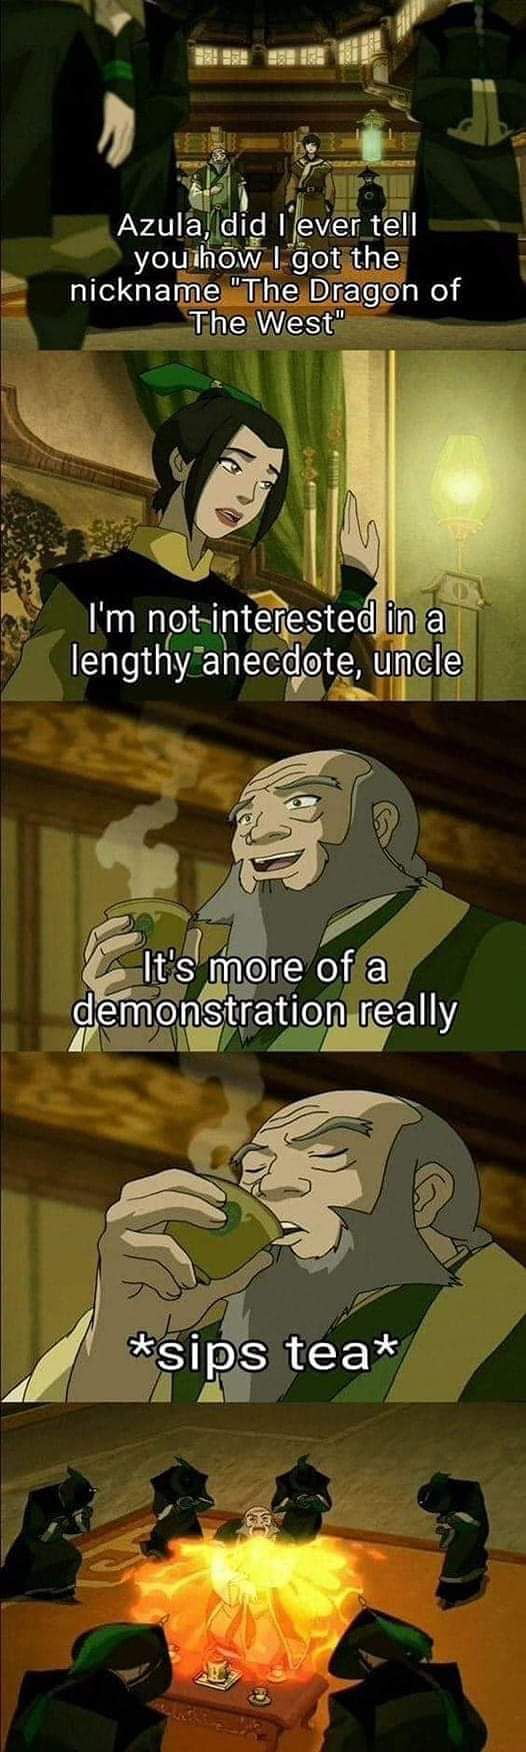 Iroh drinks tea is like he is cracking knuckles before a fight - 9GAG